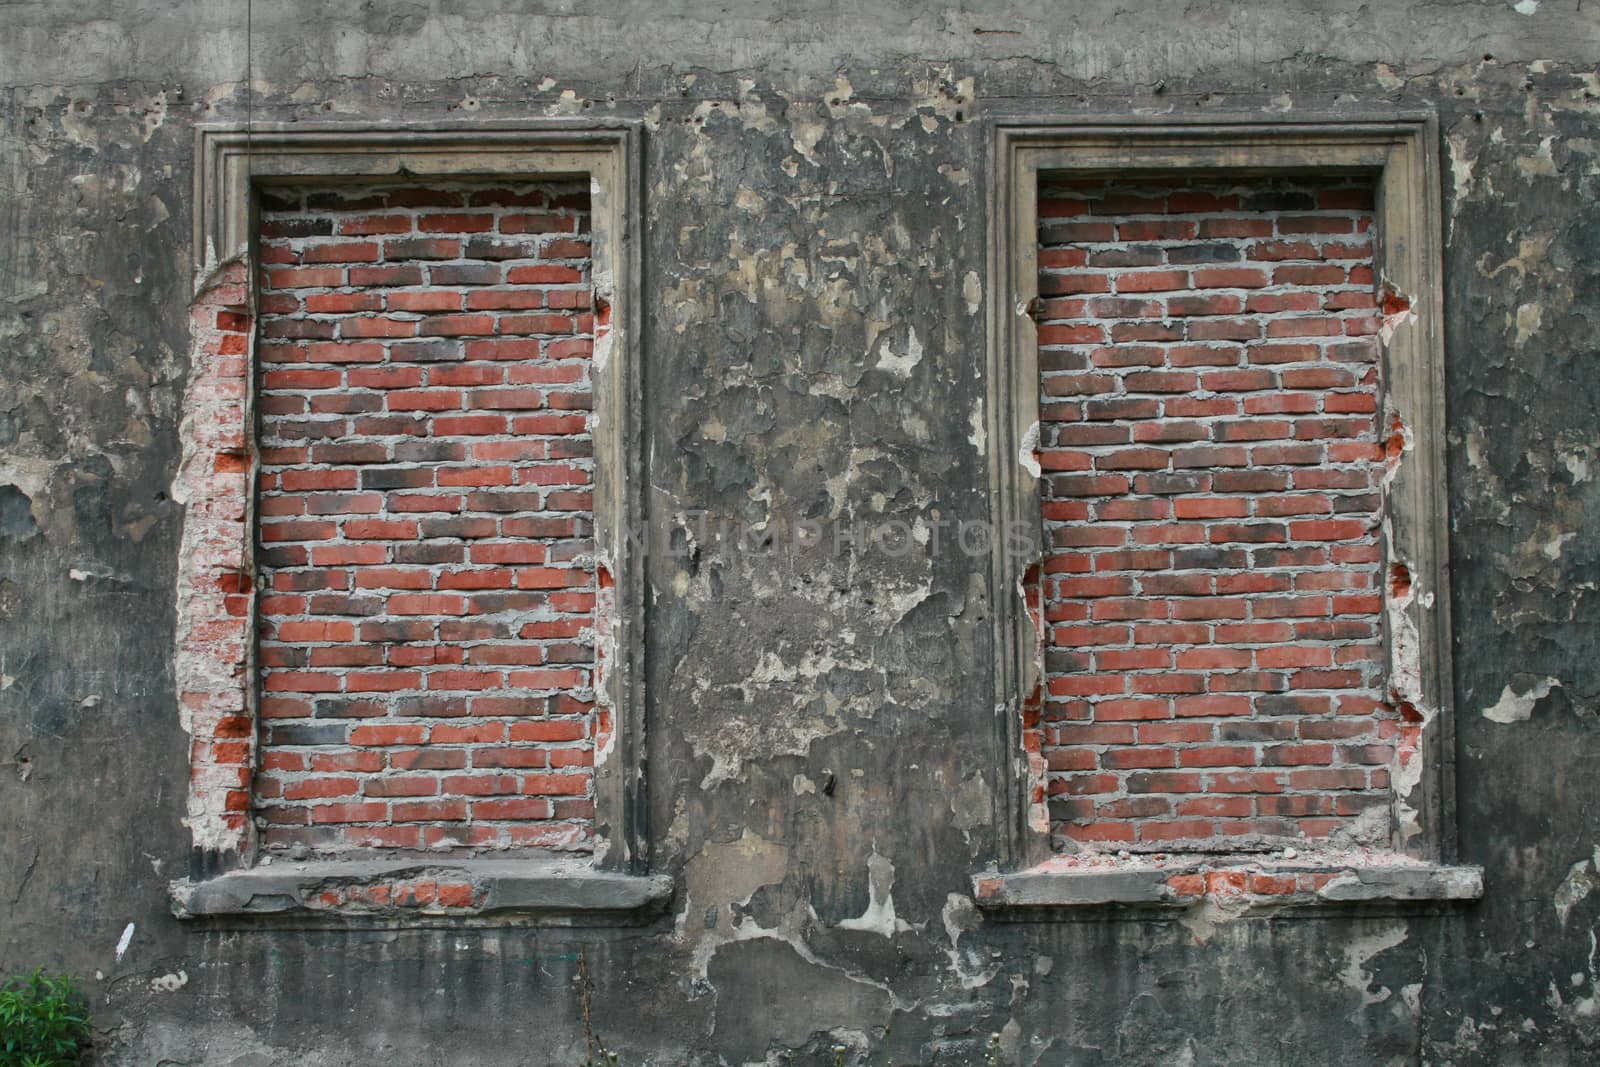 Bricked up windows in old building - outdoor image 